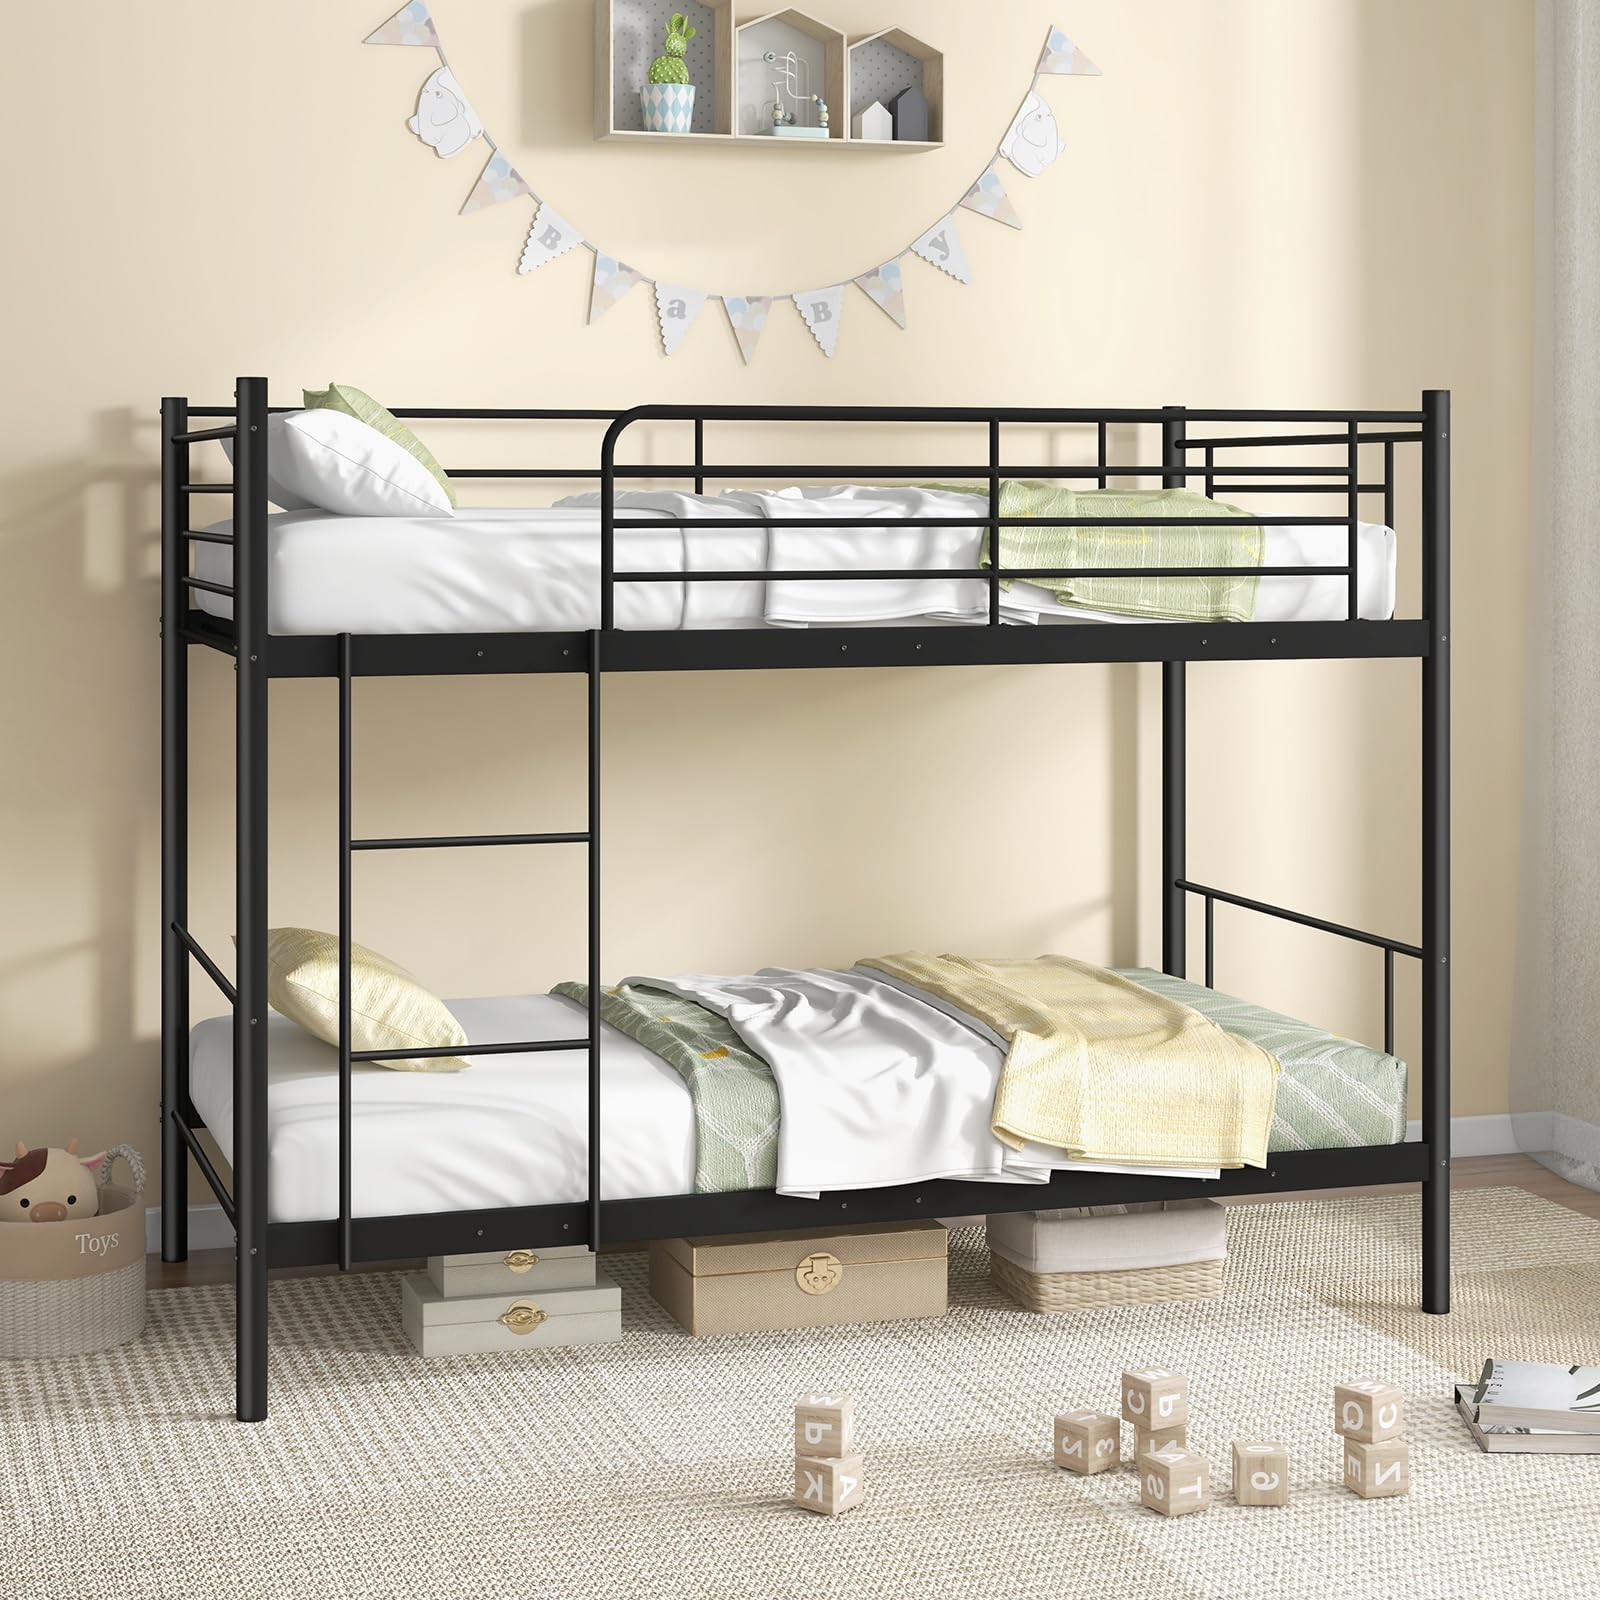 Giantex Bunk Bed Twin Over Twin, Metal Bunk Bed Frame w/Built-in Ladder, Safety Guardrail